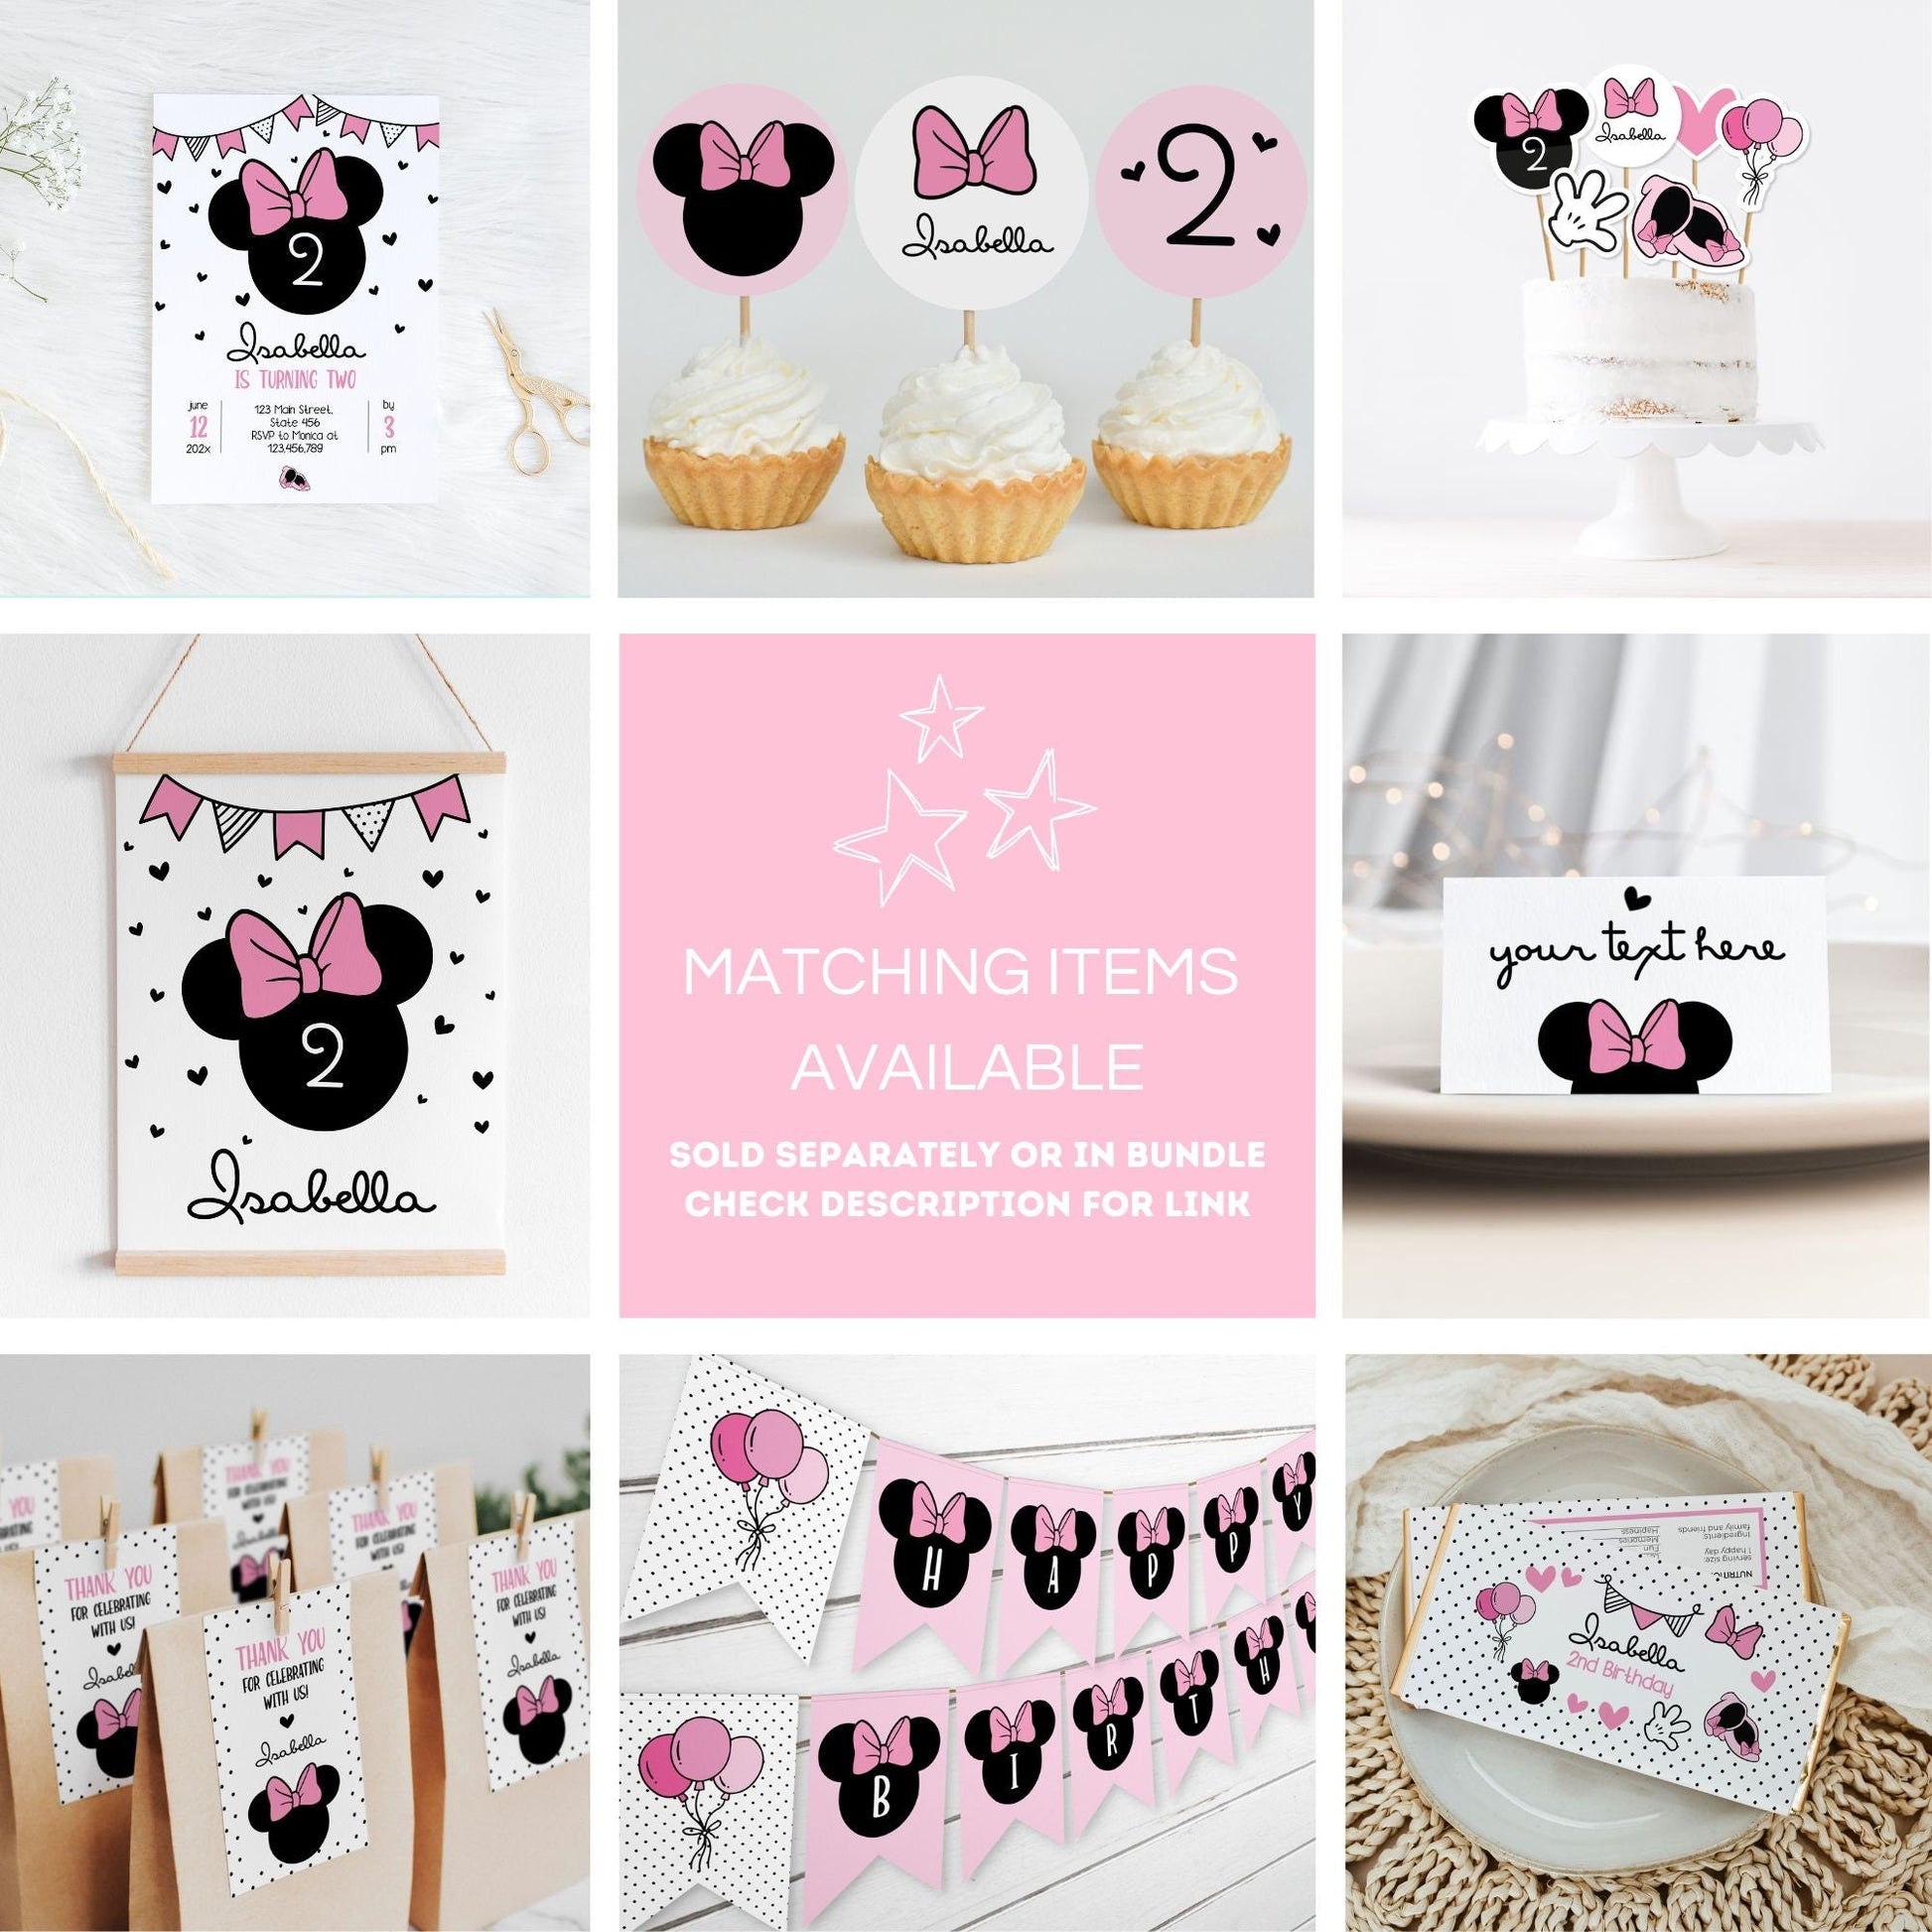 Download These Free Pink Minnie Mouse Party Printables!